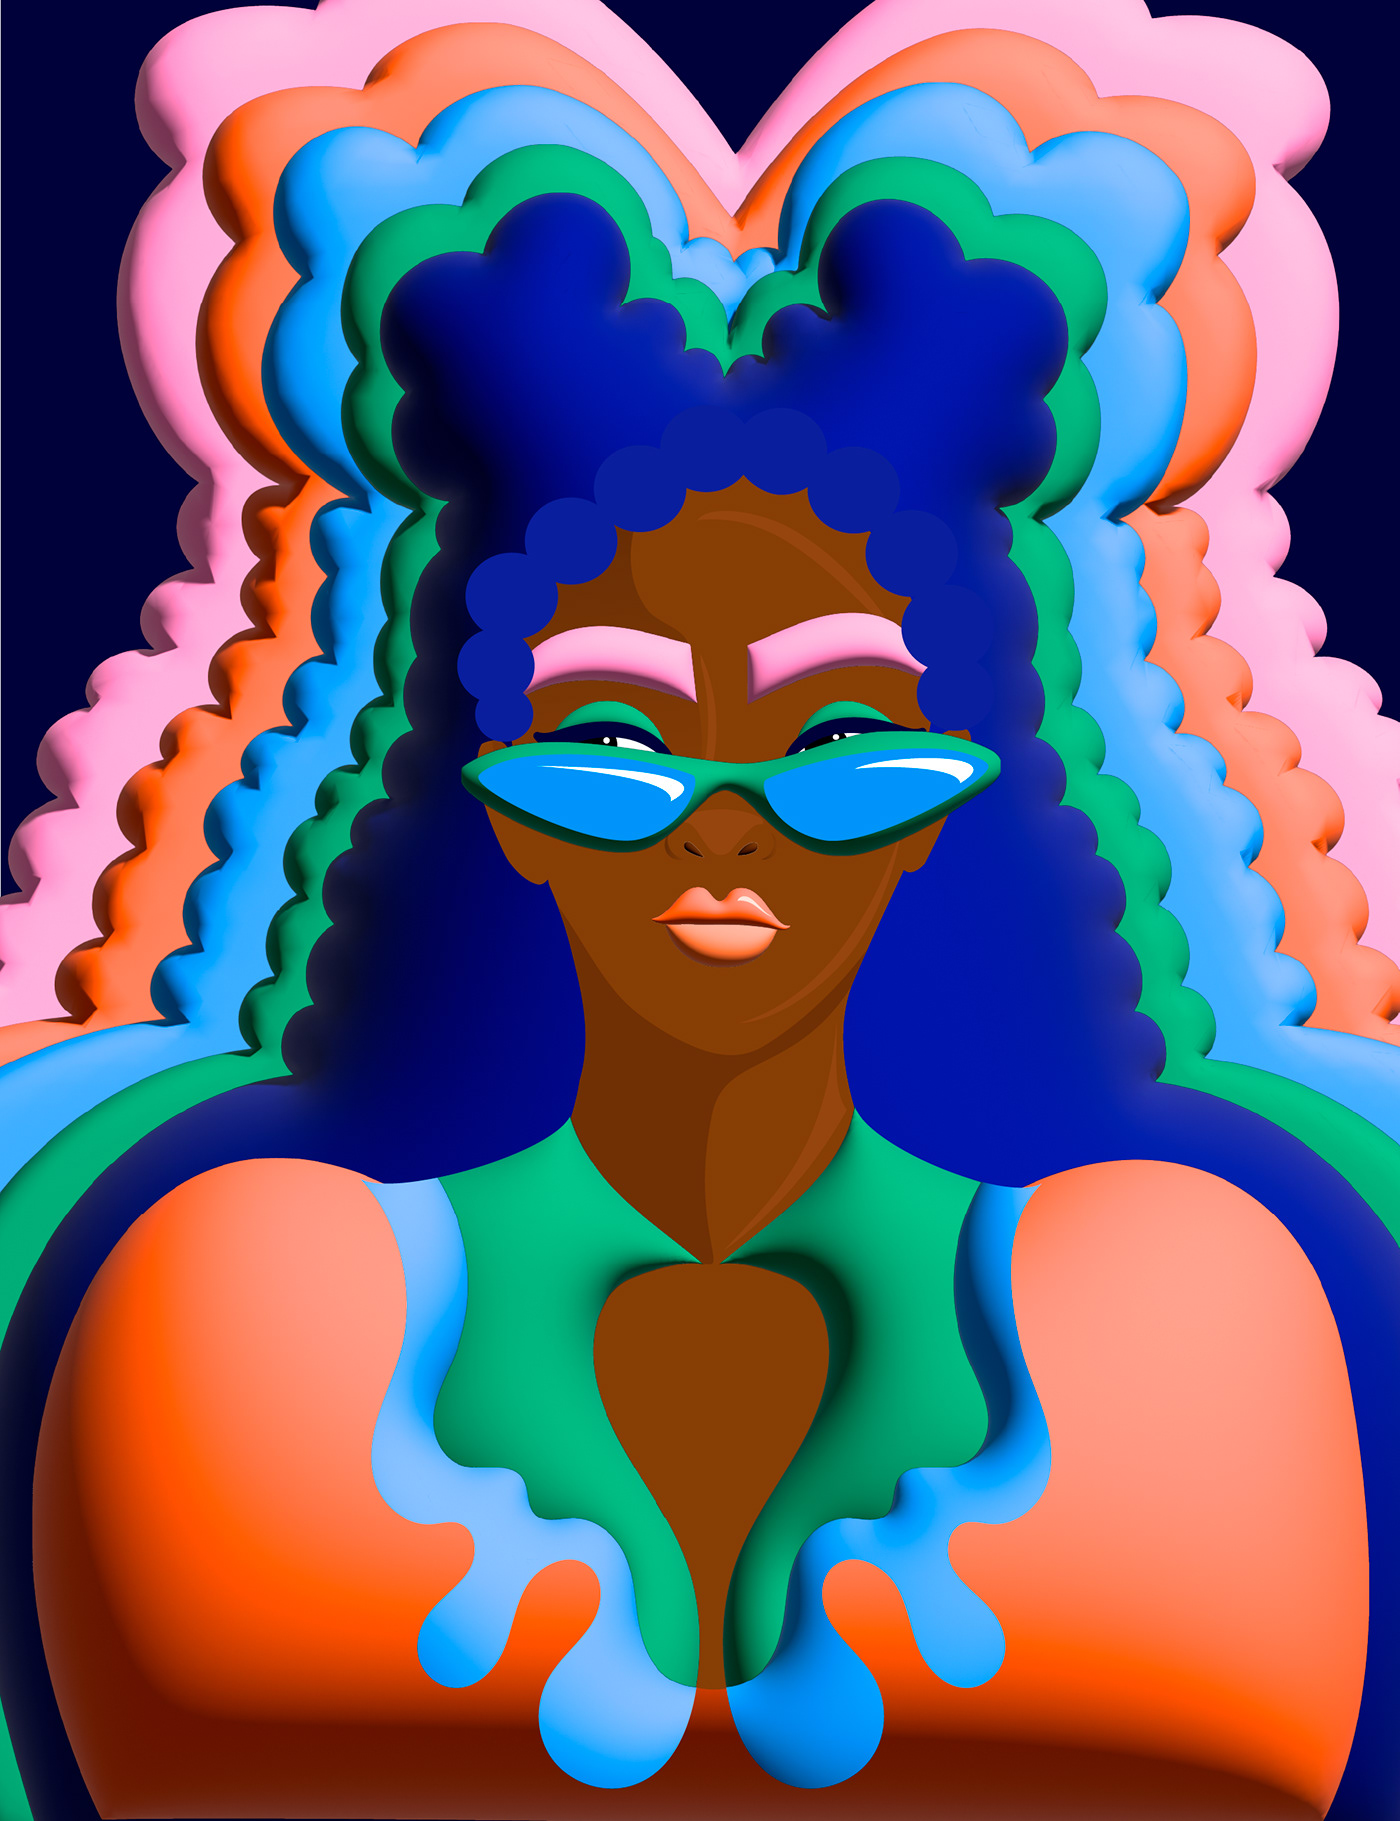 woman illustration with glasses and curly hair